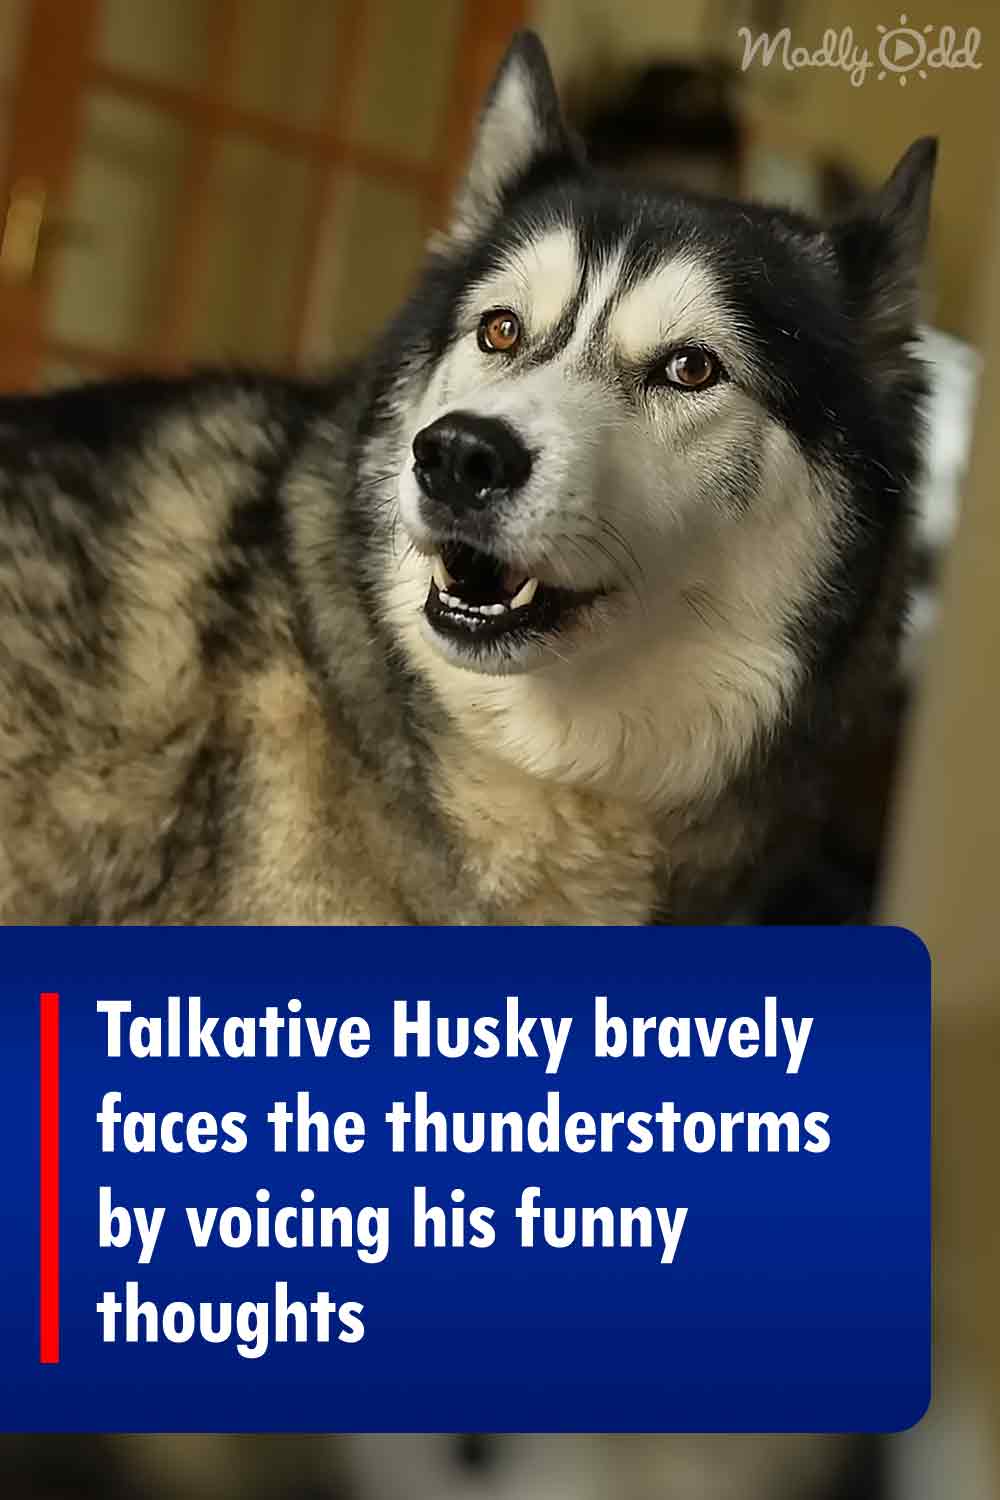 Talkative Husky bravely faces the thunderstorms by voicing his funny thoughts